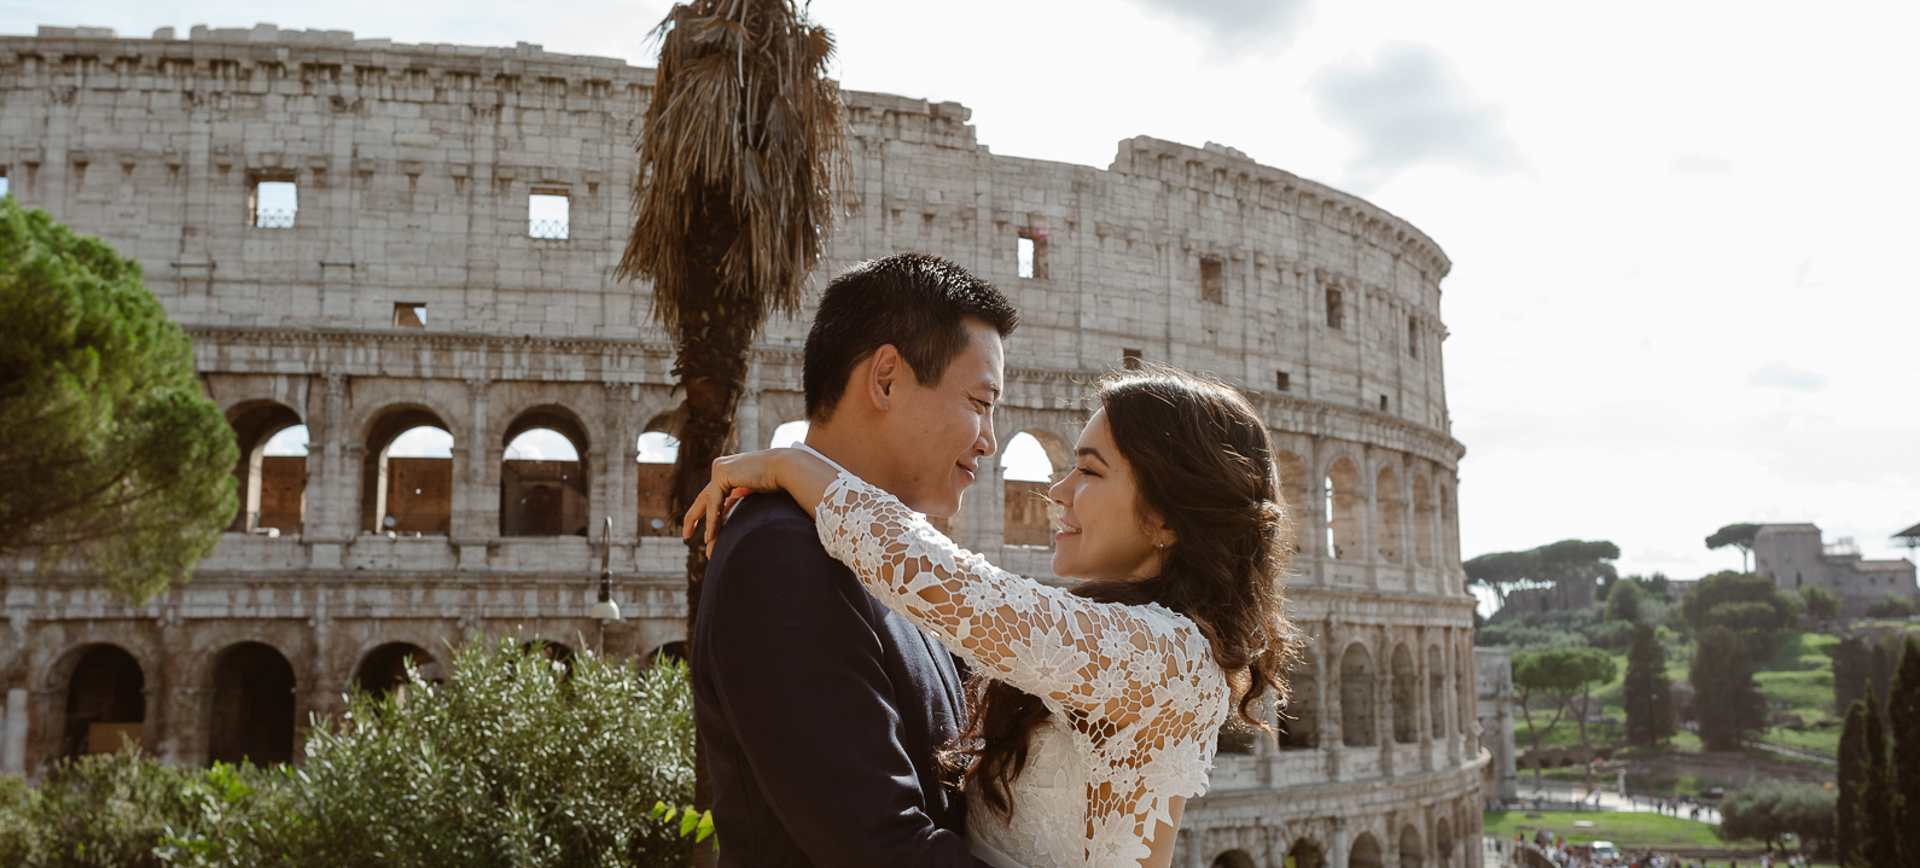 italy vow renewal - rome elopement package in europe